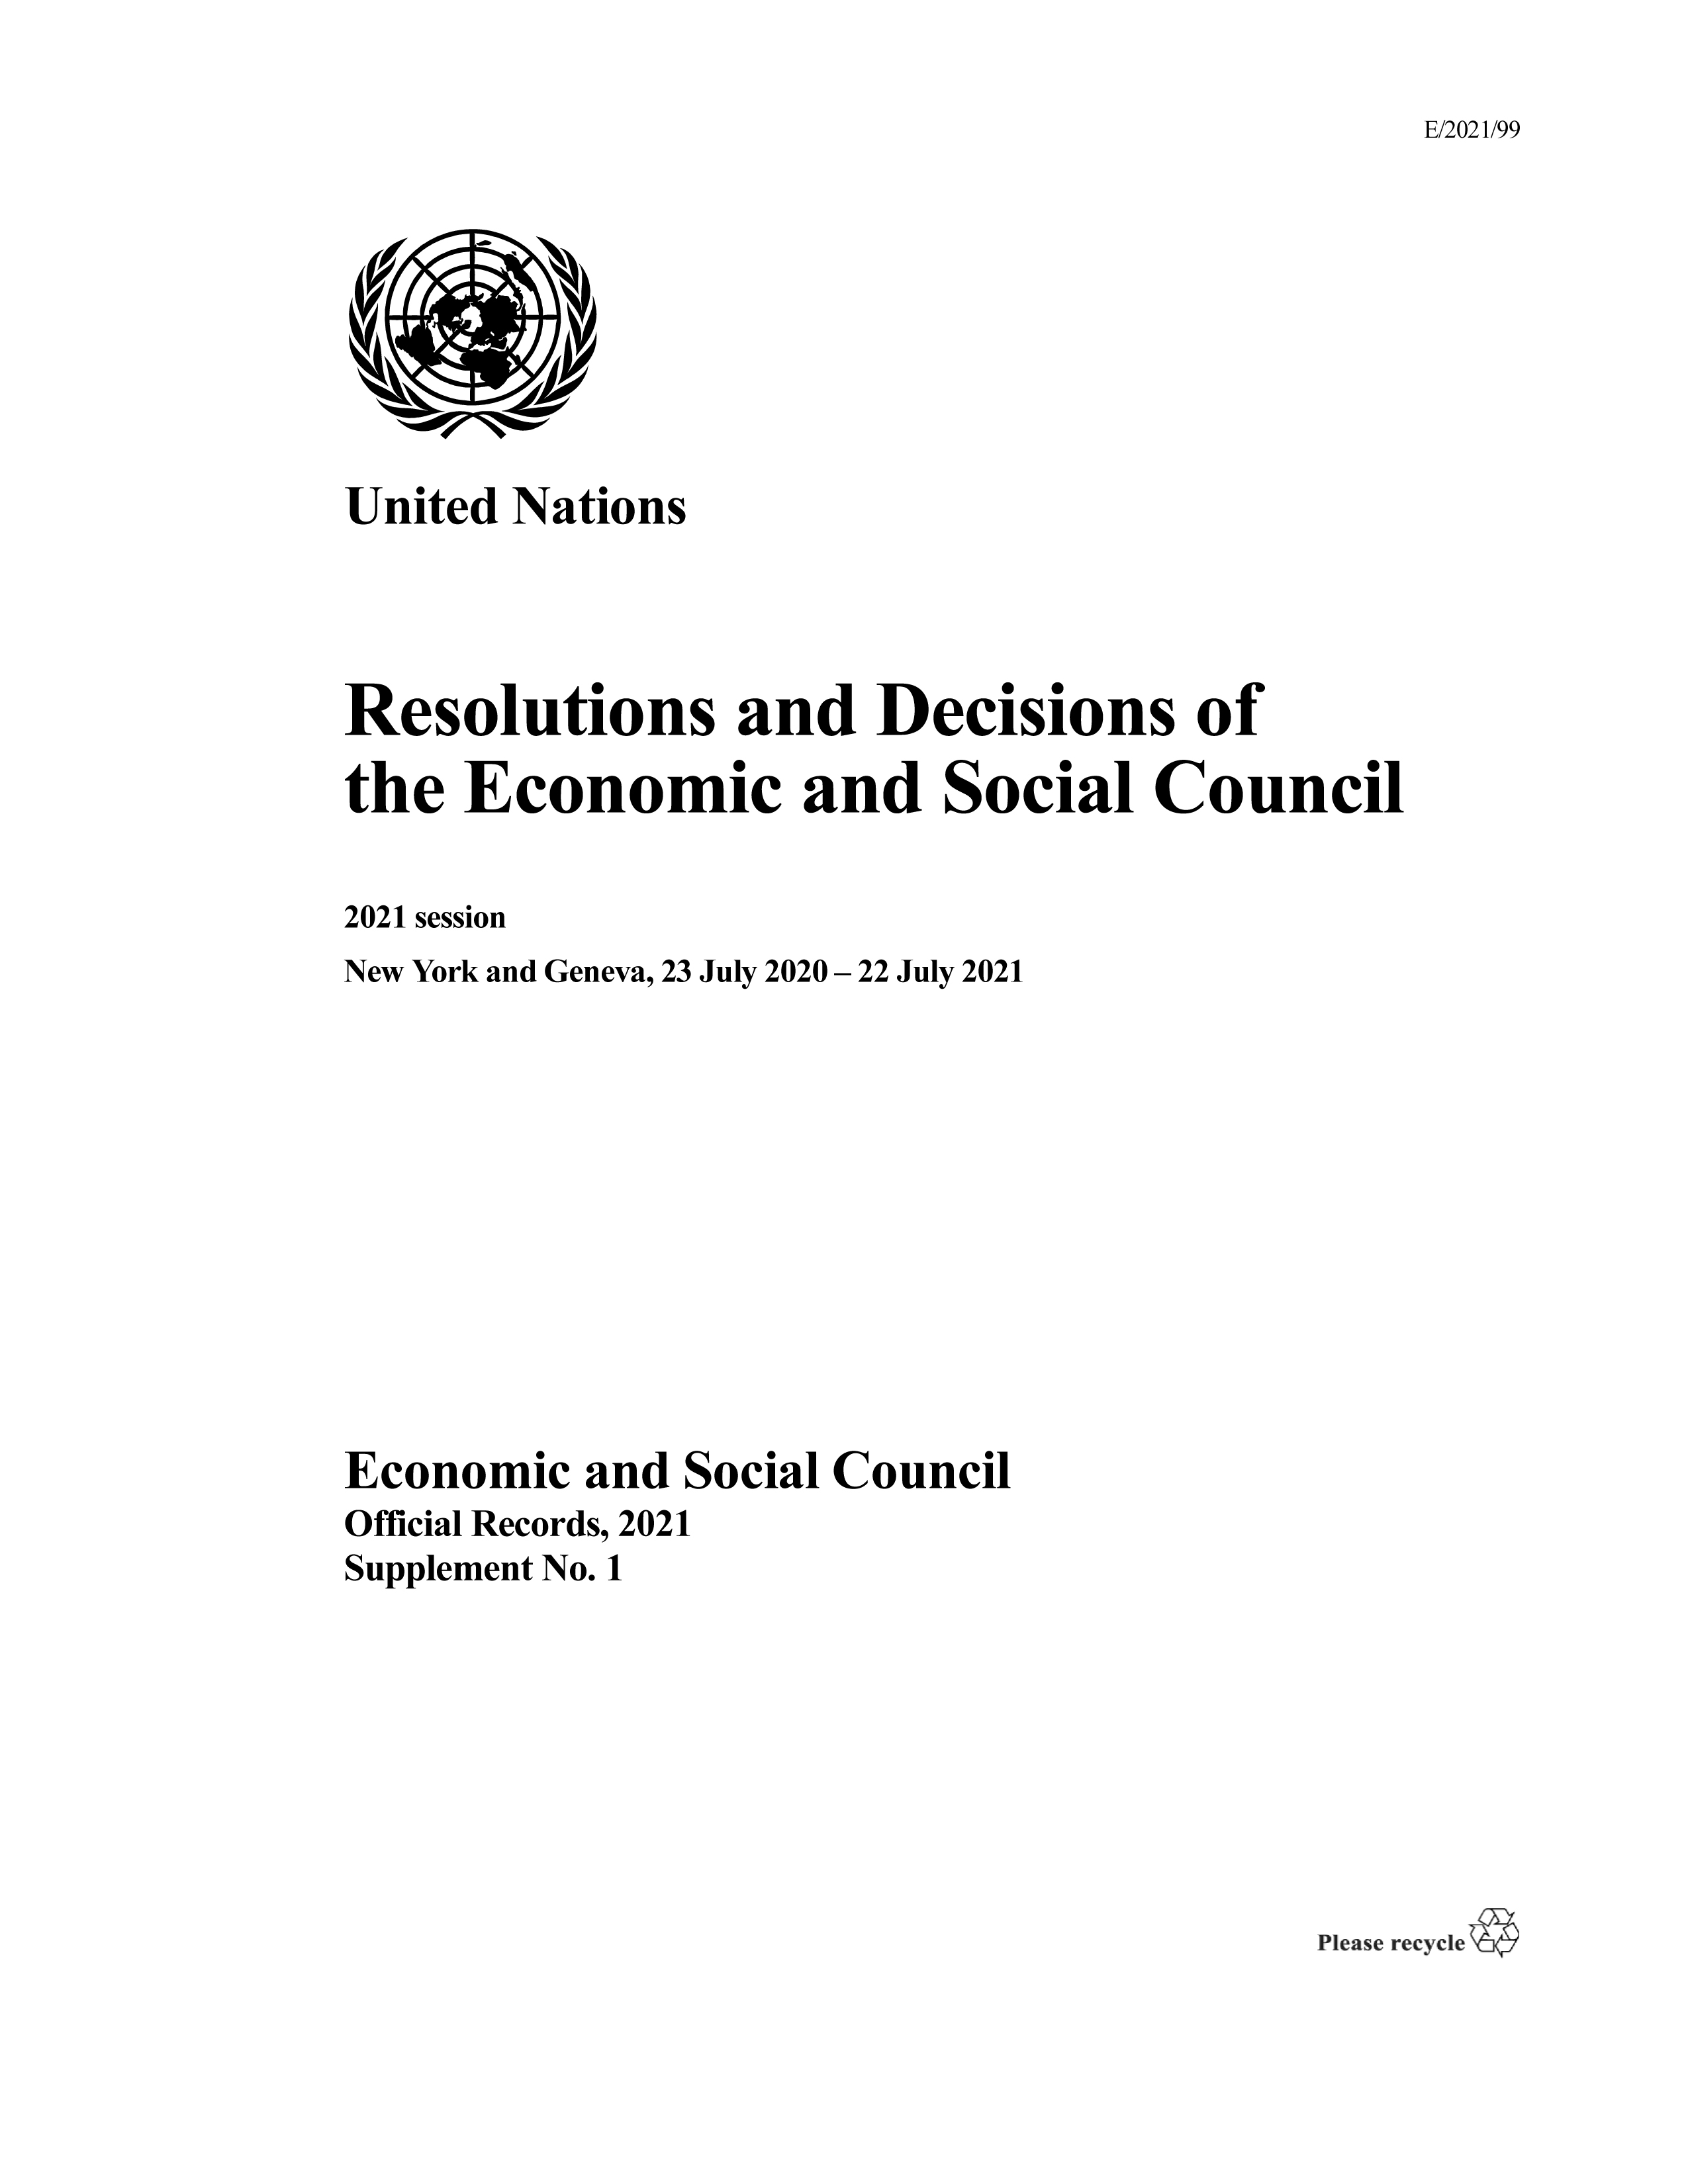 image of Resolutions and Decisions of the Economic and Social Council: 2021 Session